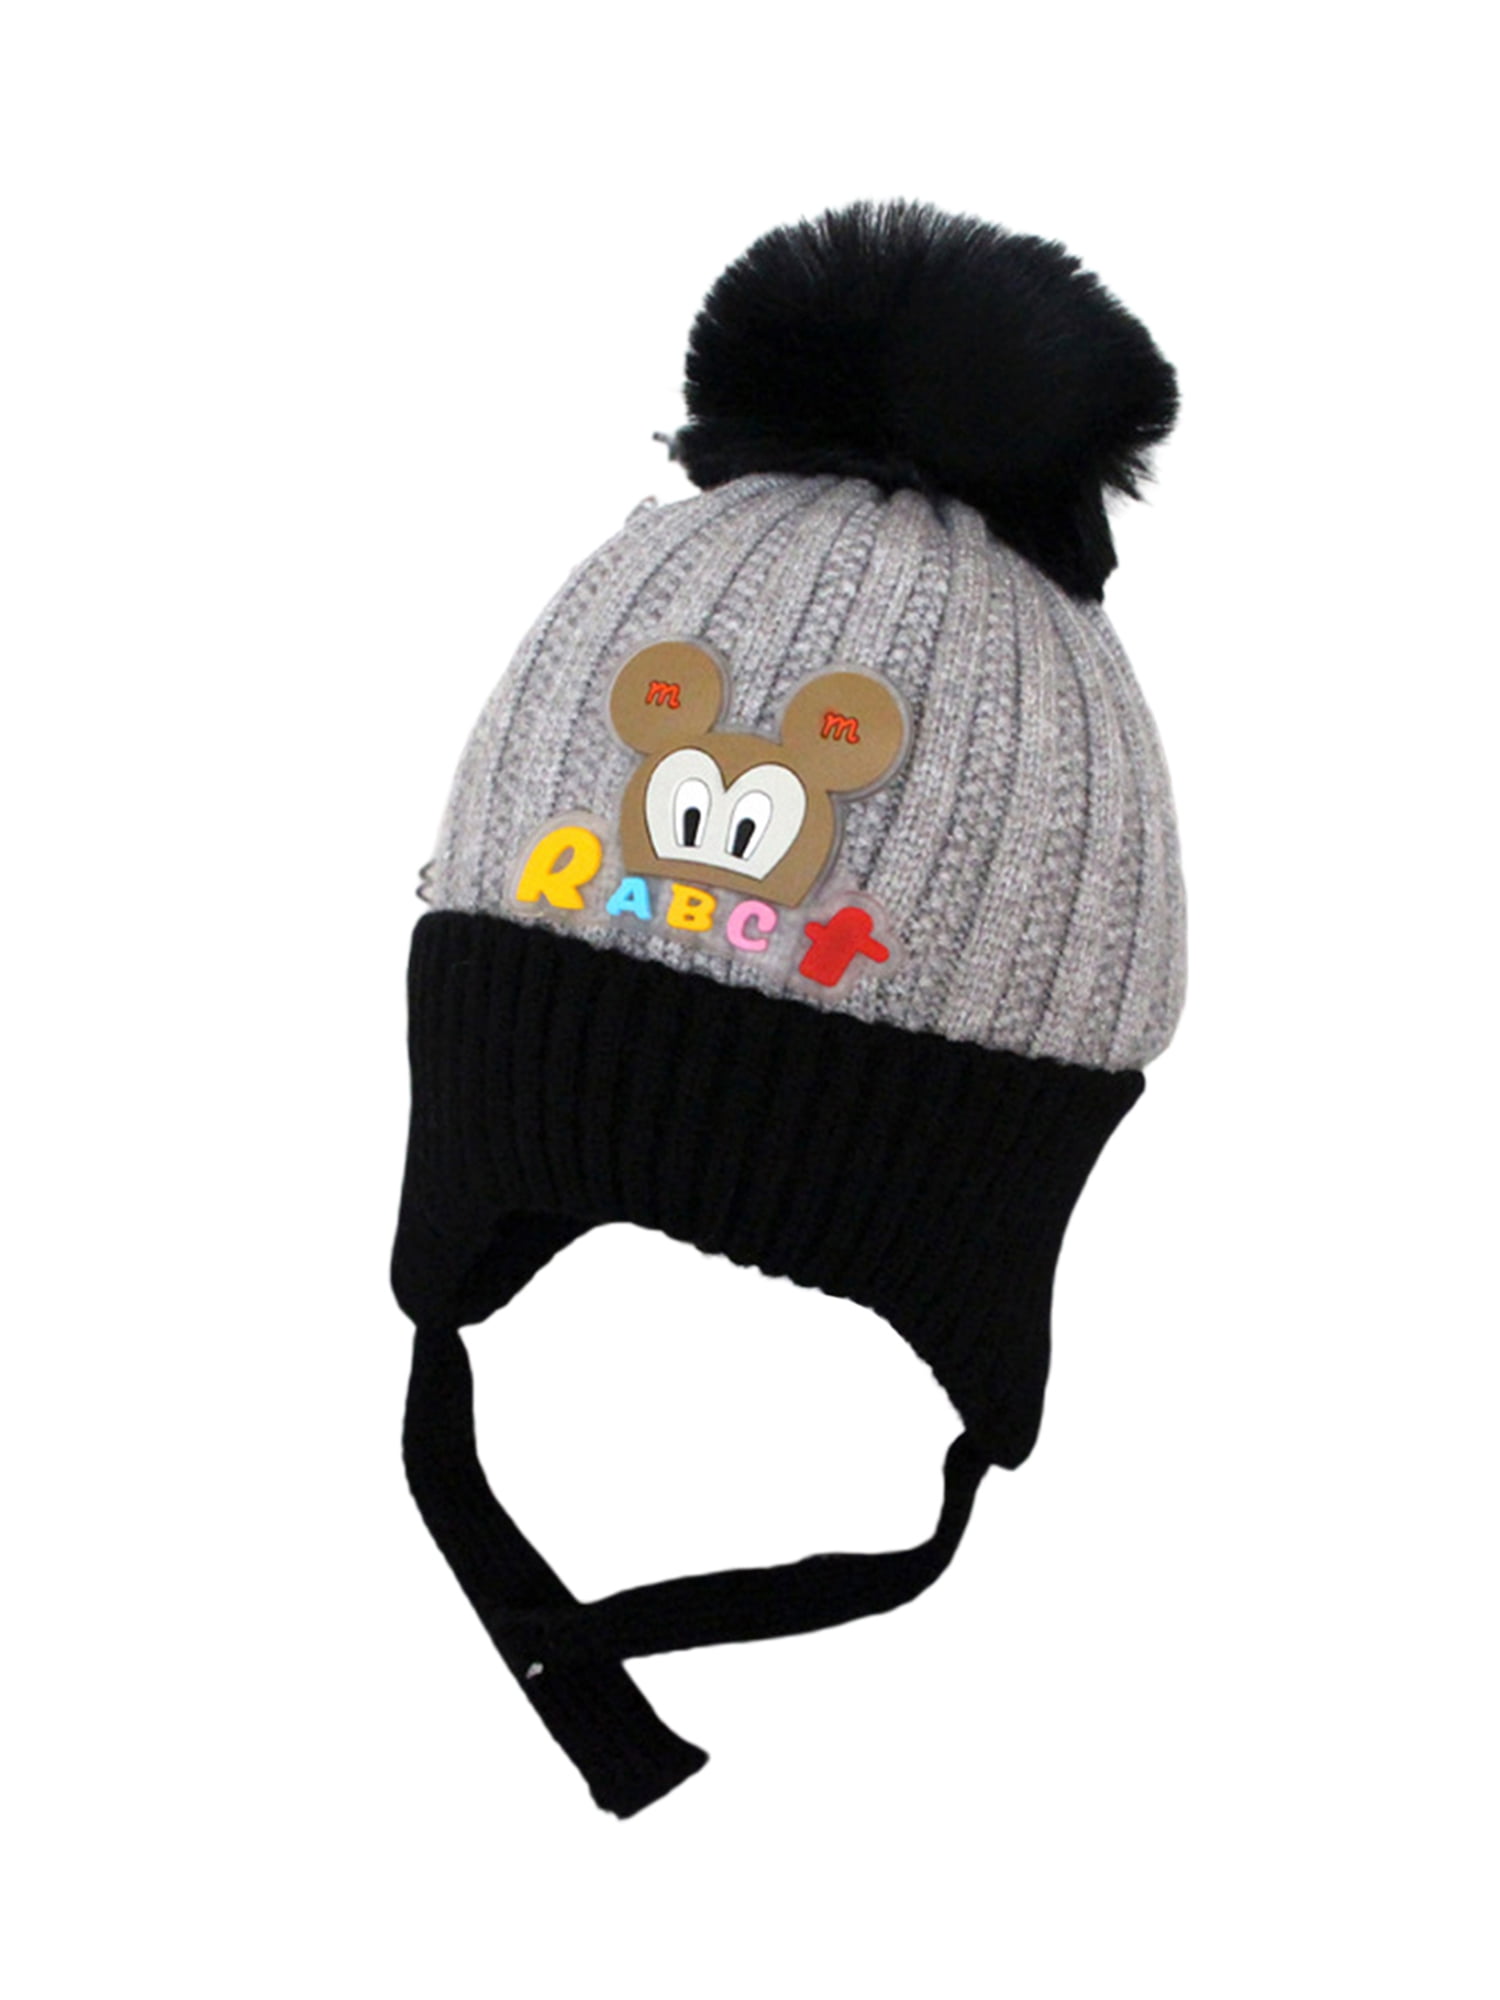 Toddler Winter Beanie Hat Baby Kids Warm Fleece Skiing Knit Cap with Ear Flaps~ 